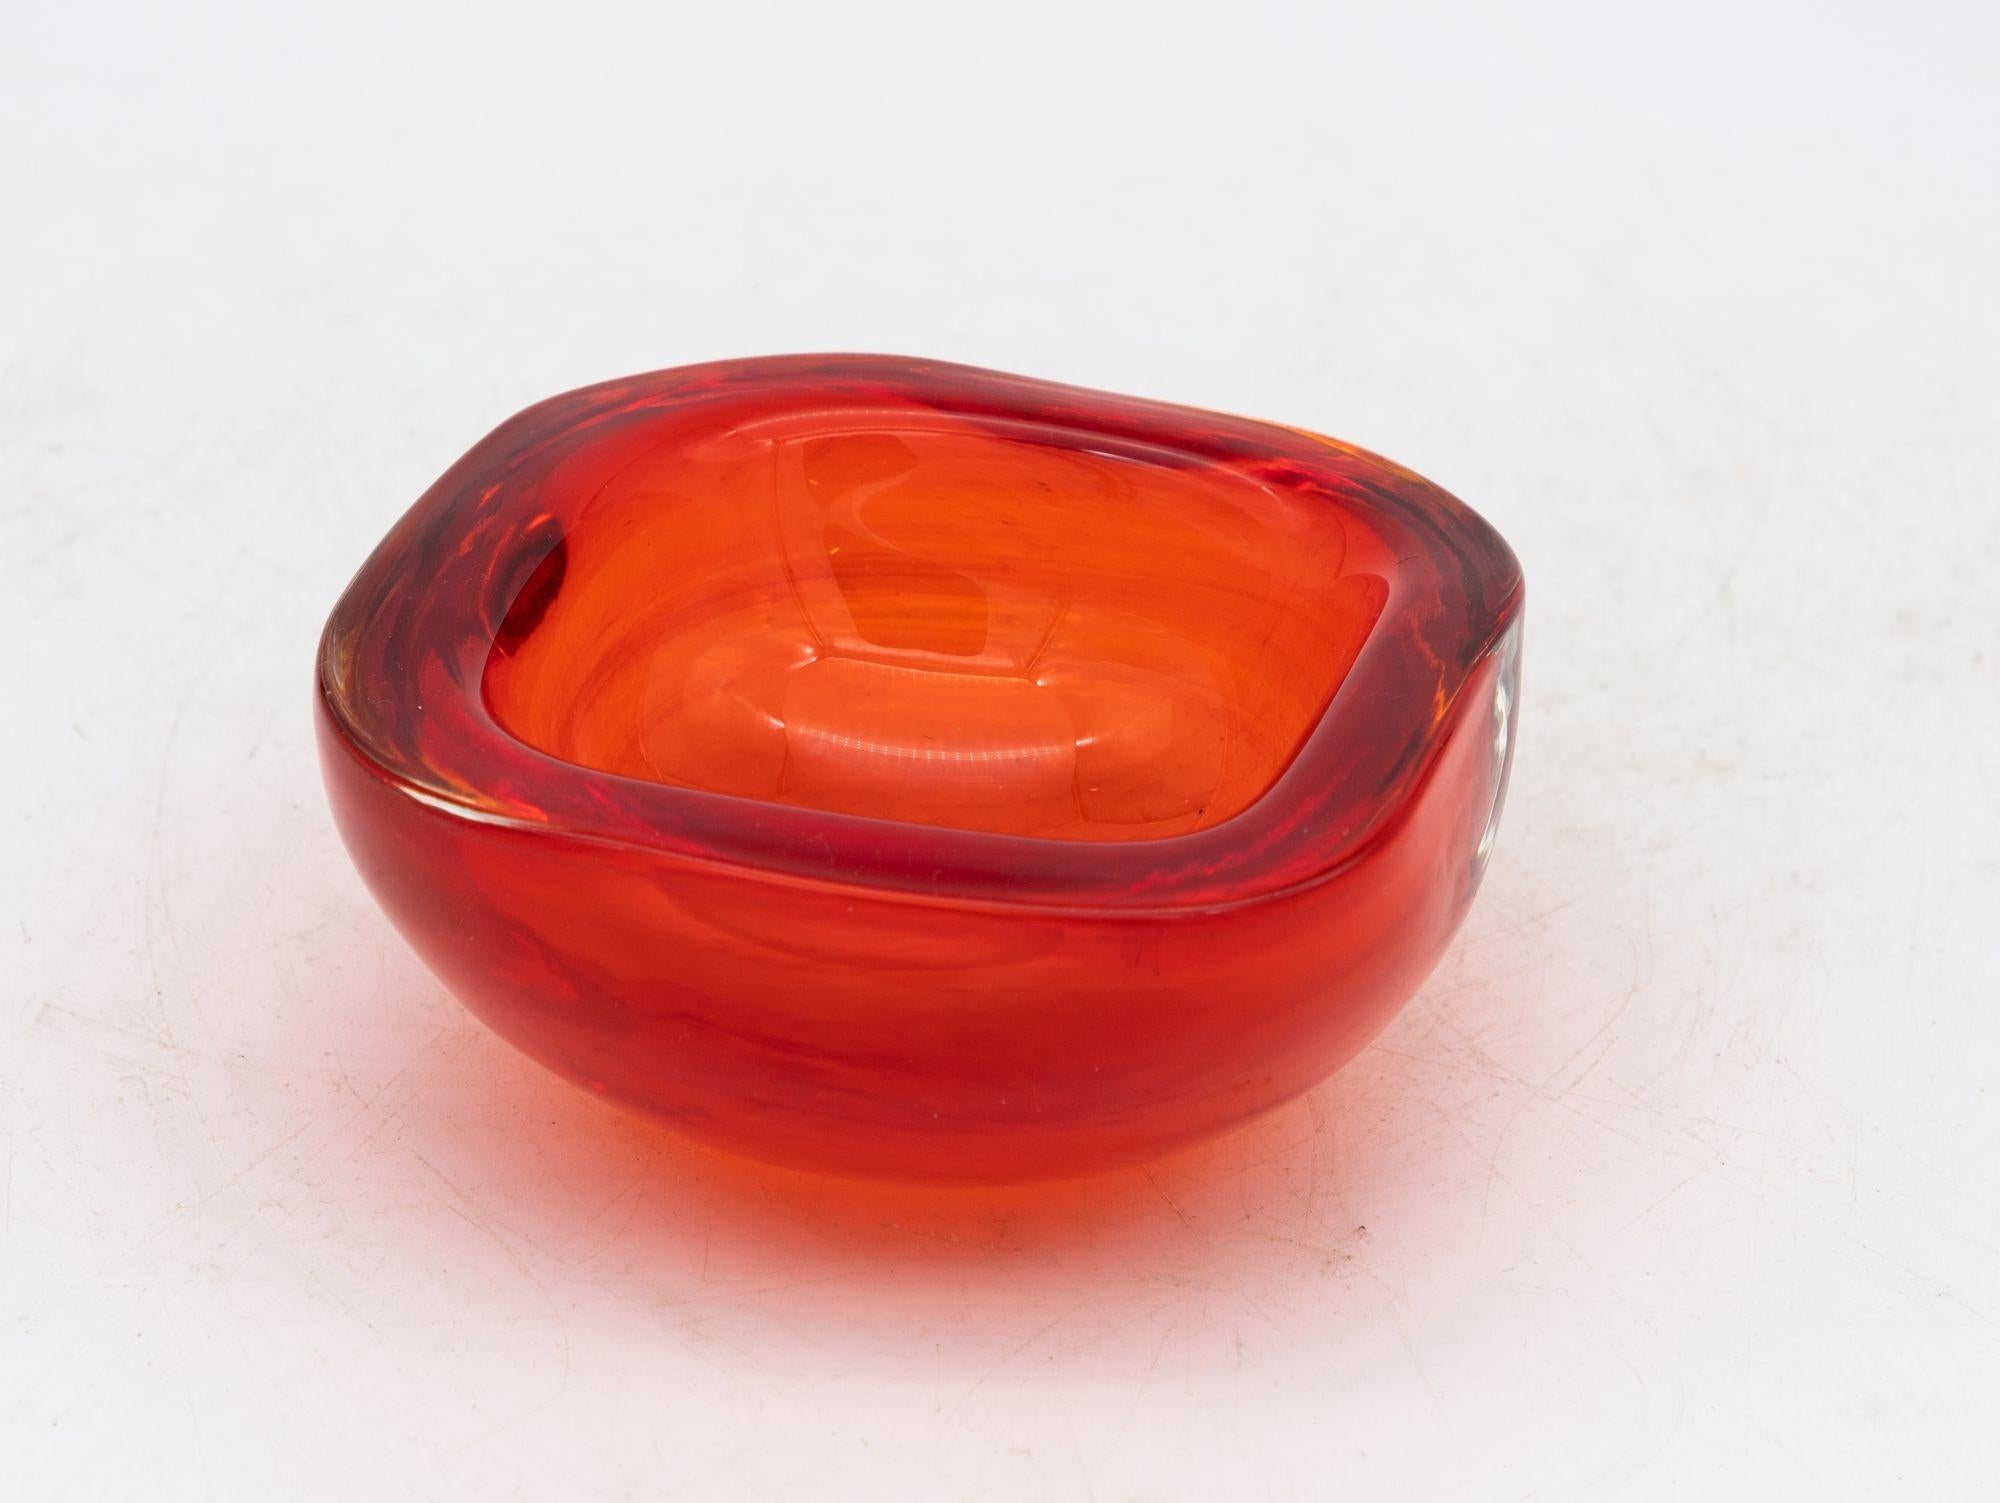 Crafted in the vibrant spirit of the 1960s, this Murano glass ashtray exudes timeless charm. With its square shape and gently rounded corners, the thick glass construction boasts both sturdiness and elegance. The color palette, a vibrant orange red,